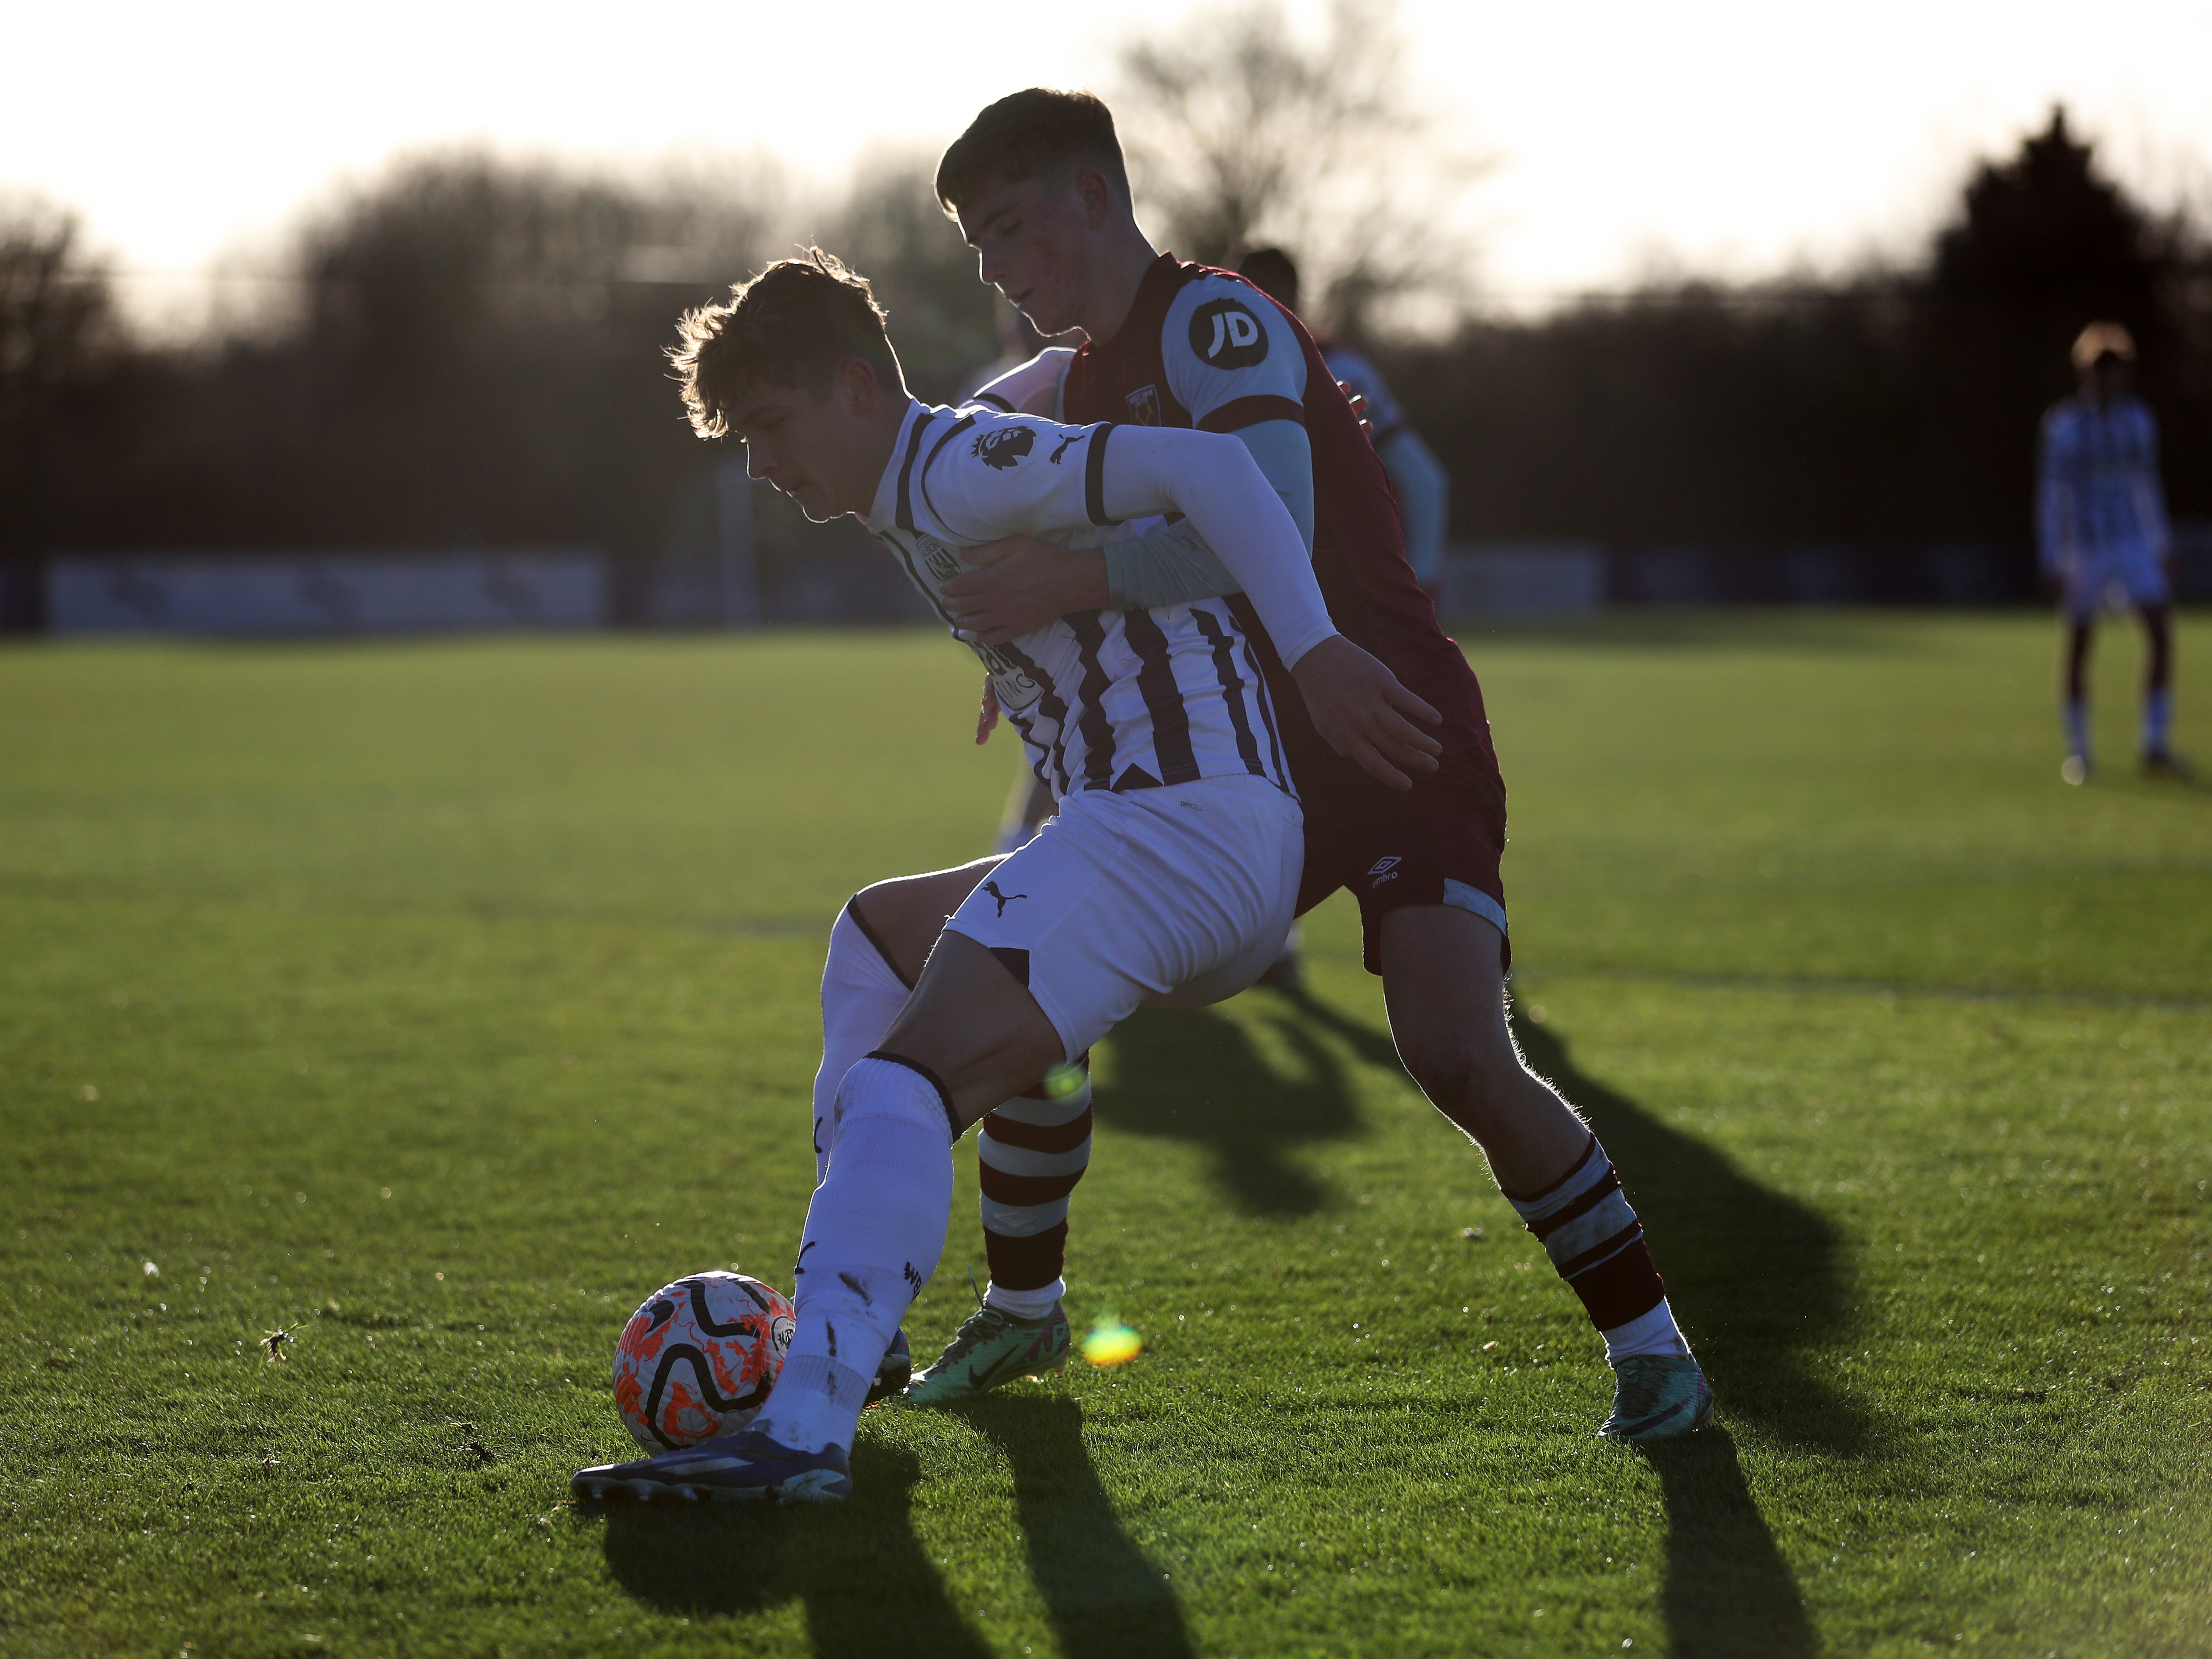 A photo of Albion midfielder Cole Deeming in action for the PL2 team against West Ham